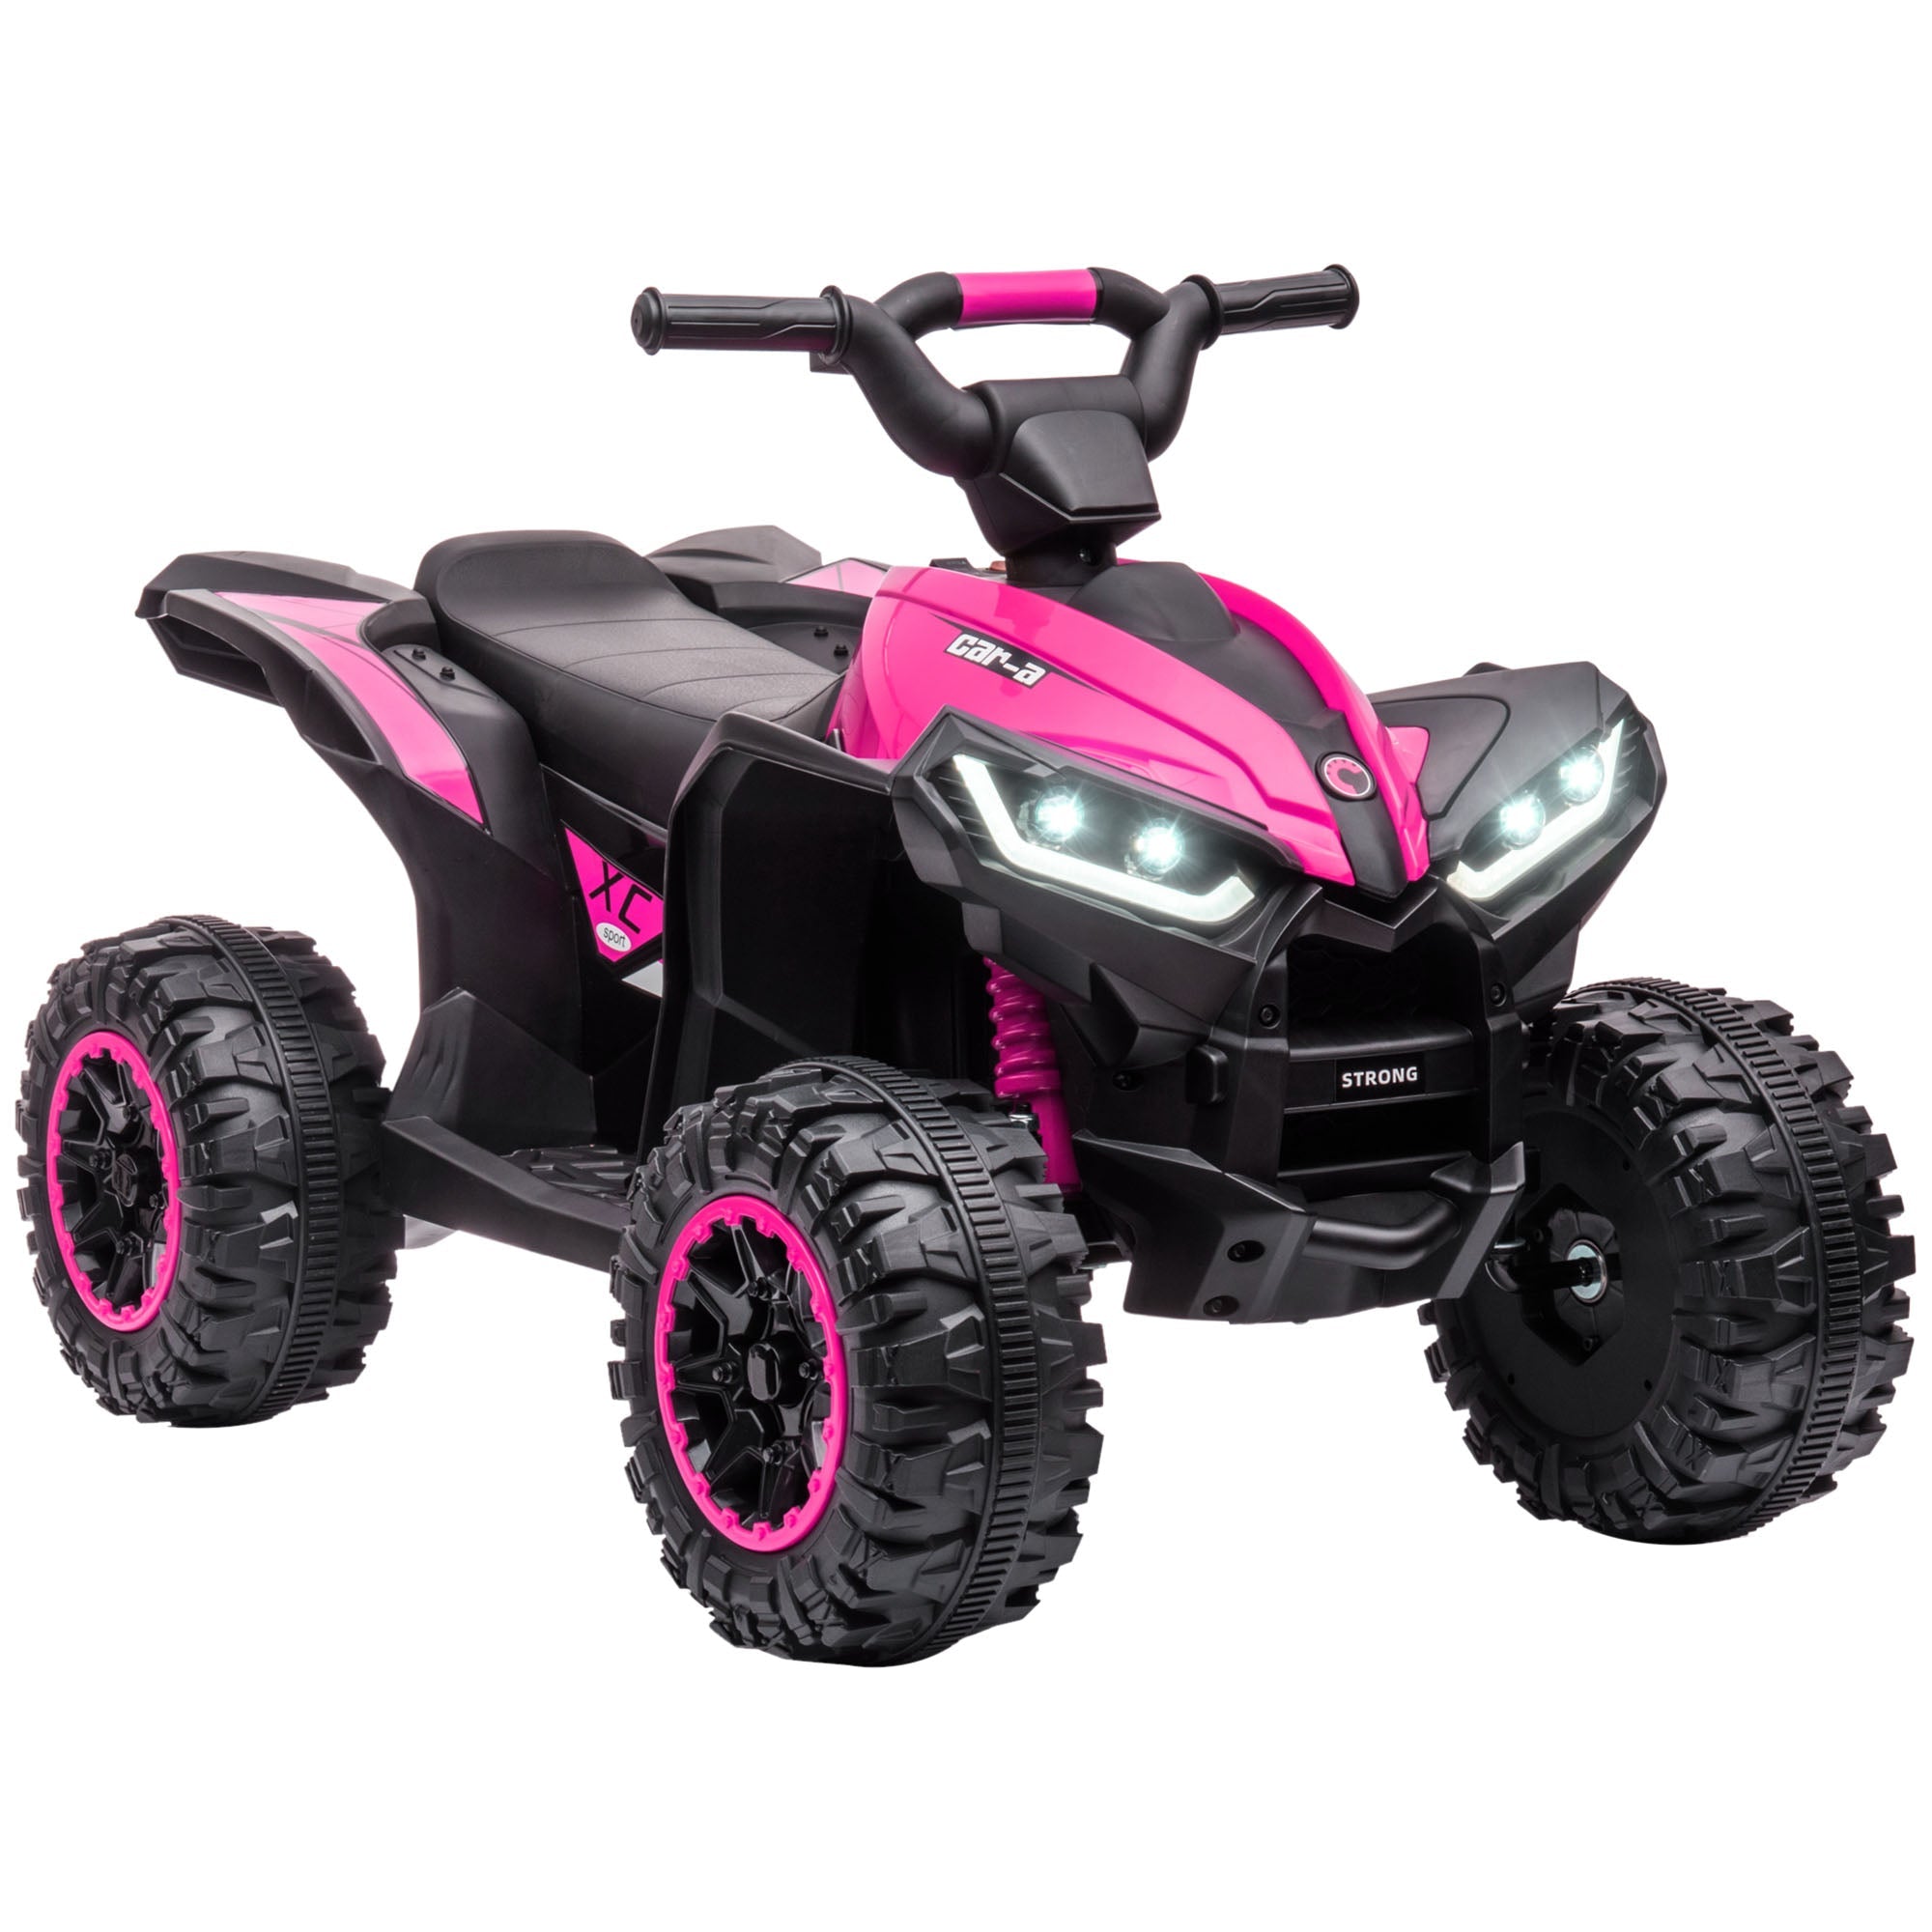 12V Quad Bike with Forward Reverse Functions, Ride on Car ATV Toy with High/Low Speed, Slow Start, Suspension System, Horn, Music, Pink-0